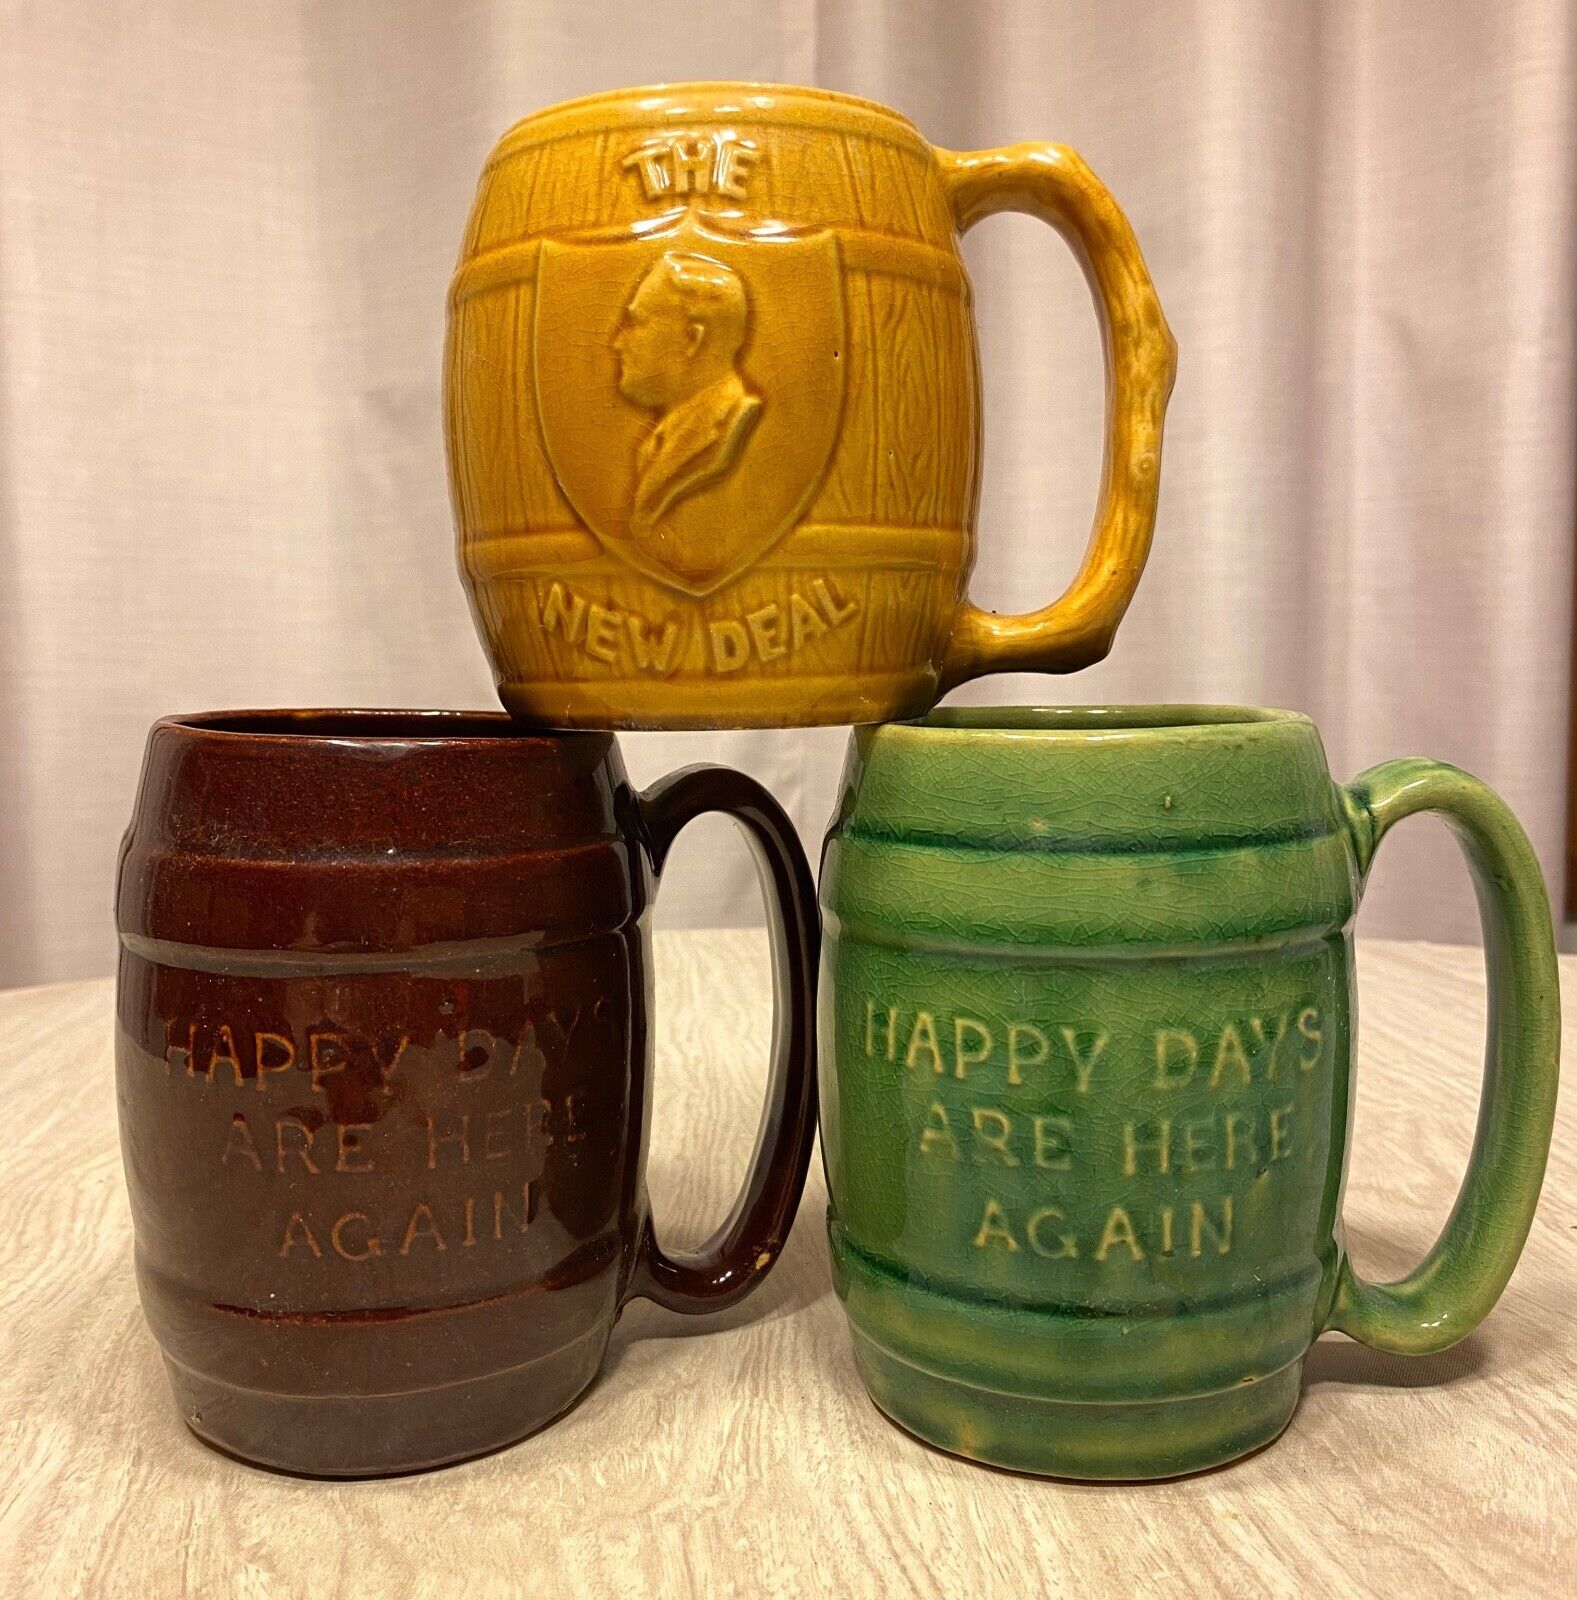 Happy Days Are Here Again Mugs Steins x3 Repeal Prohibition FDR New Deal 1932 